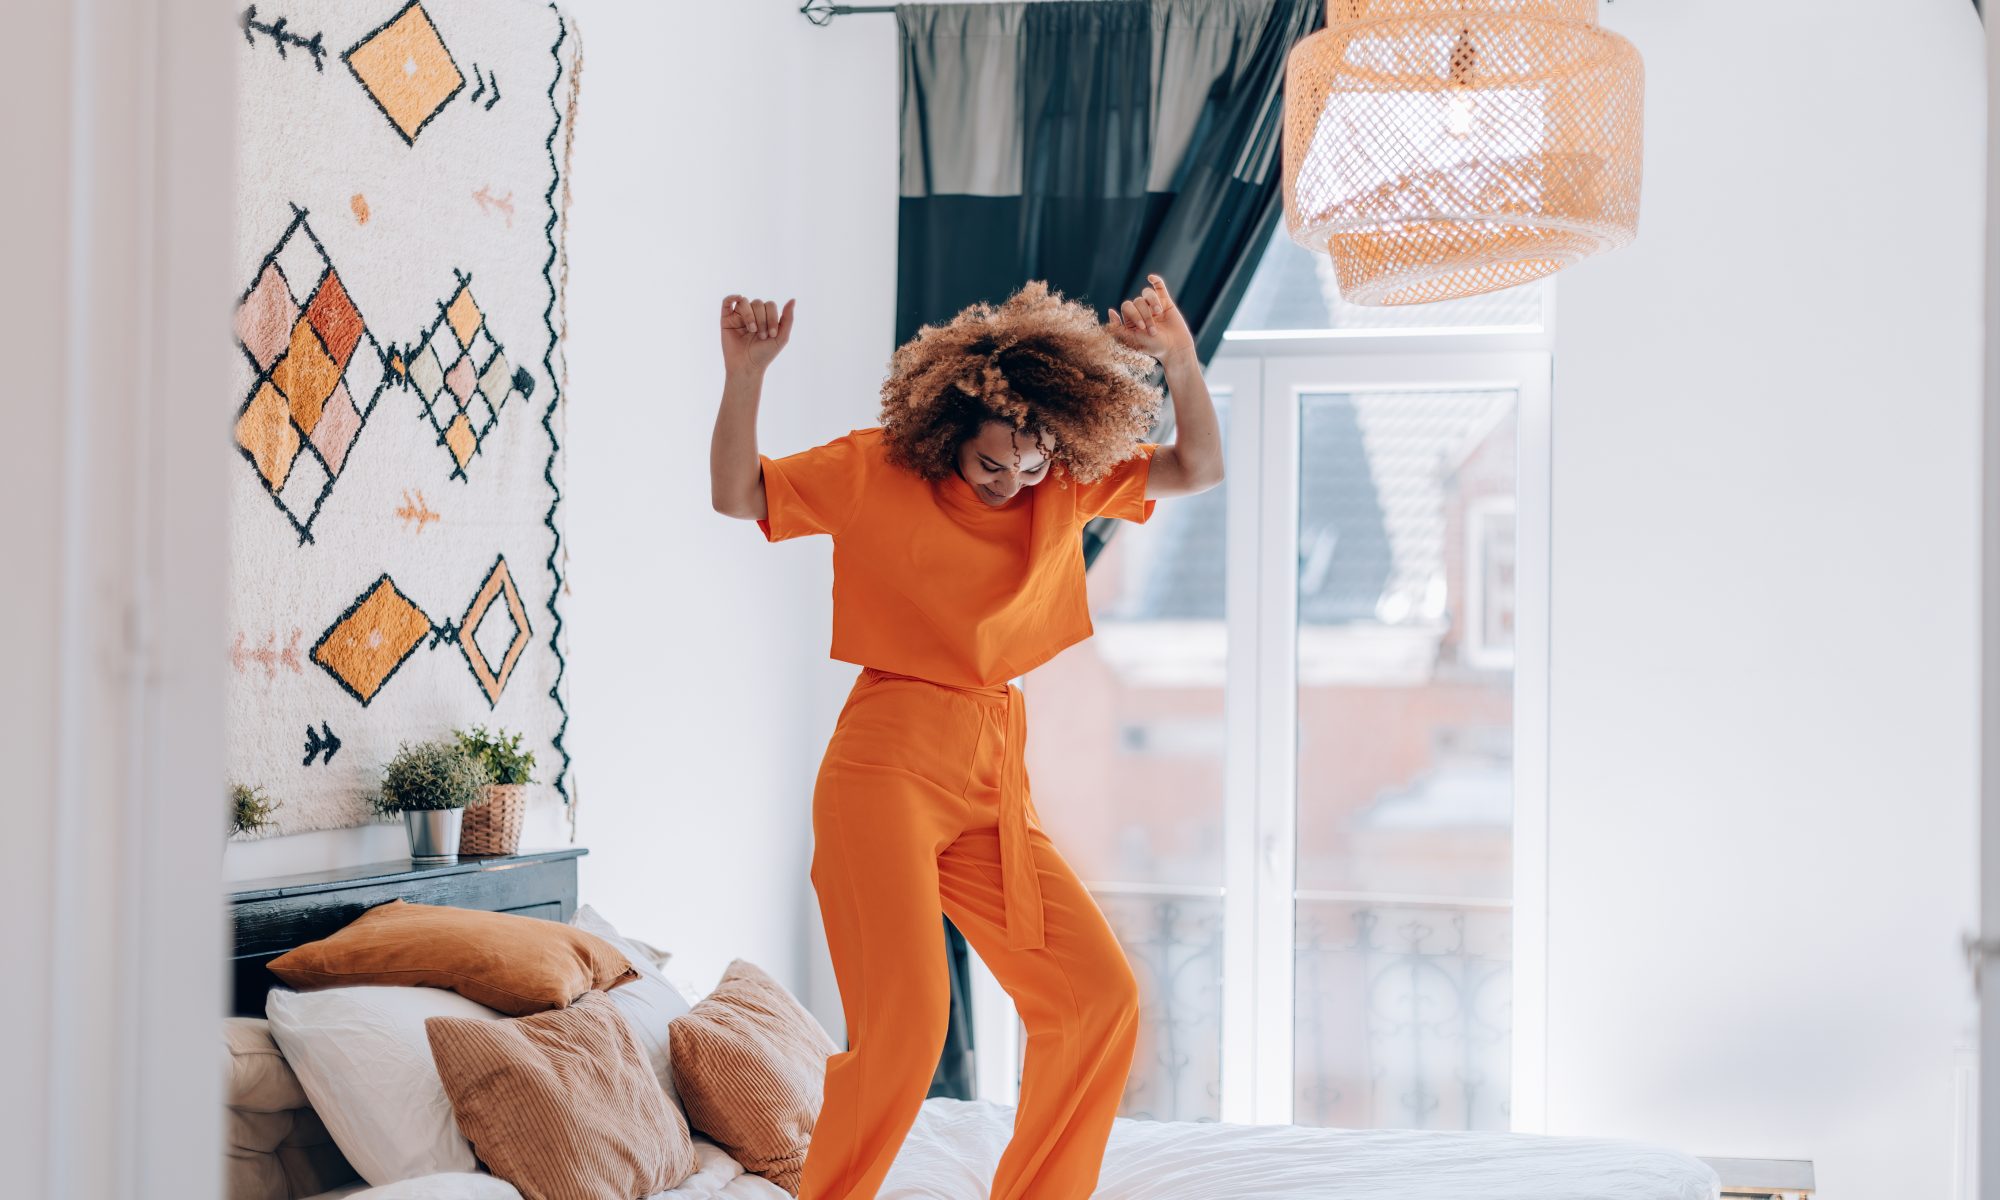 Happy Young Woman In Orange Outfit Dancing On Bed